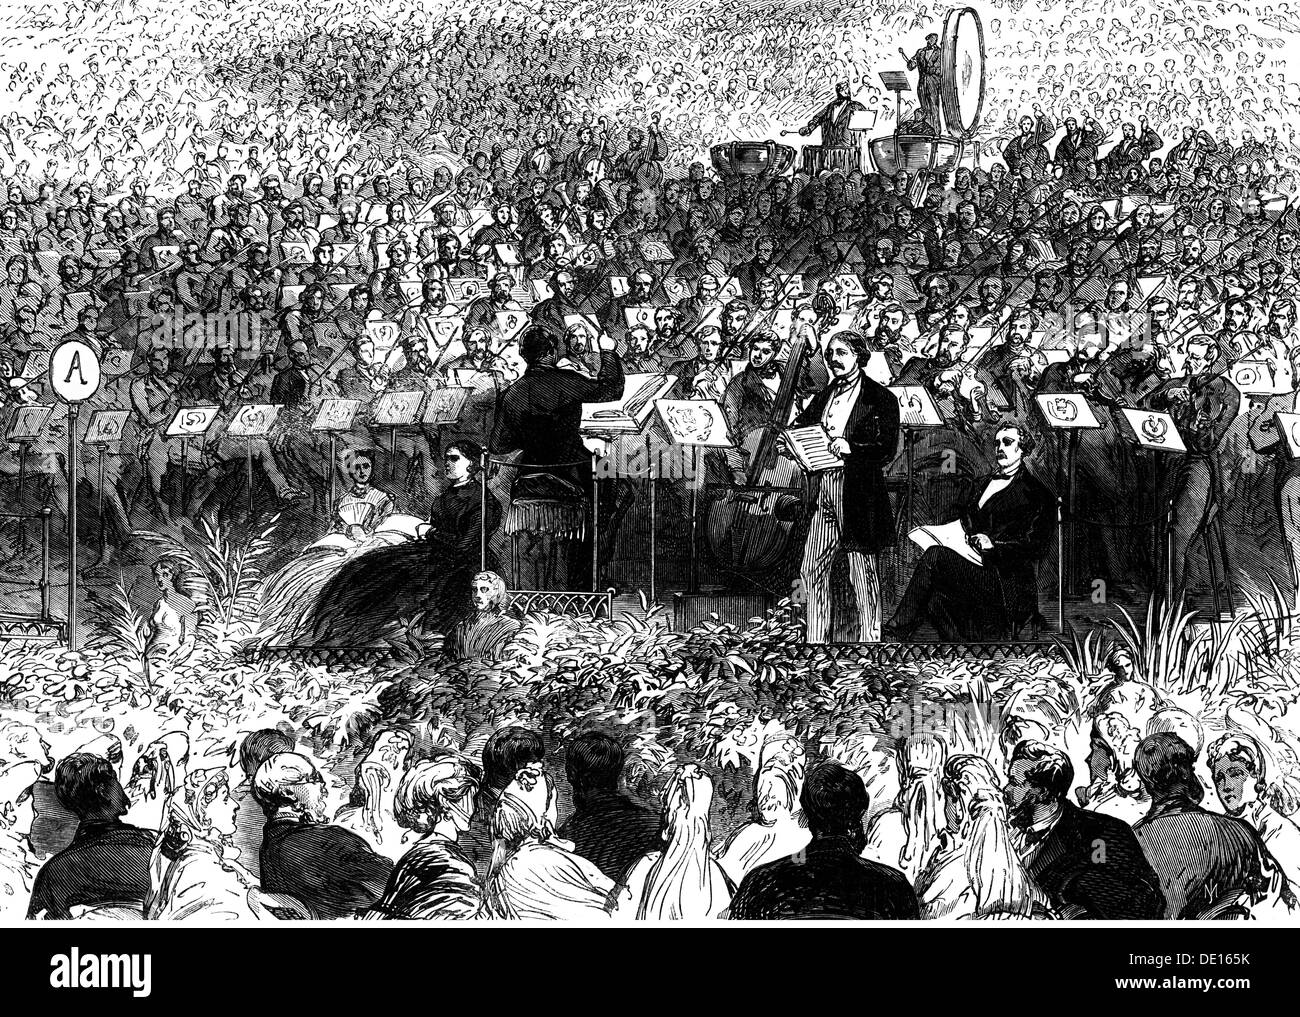 music, concert, Handel festival, Crystal Palace, London, wood engraving, 'The Illustrated London News', 1865, Additional-Rights-Clearences-Not Available Stock Photo